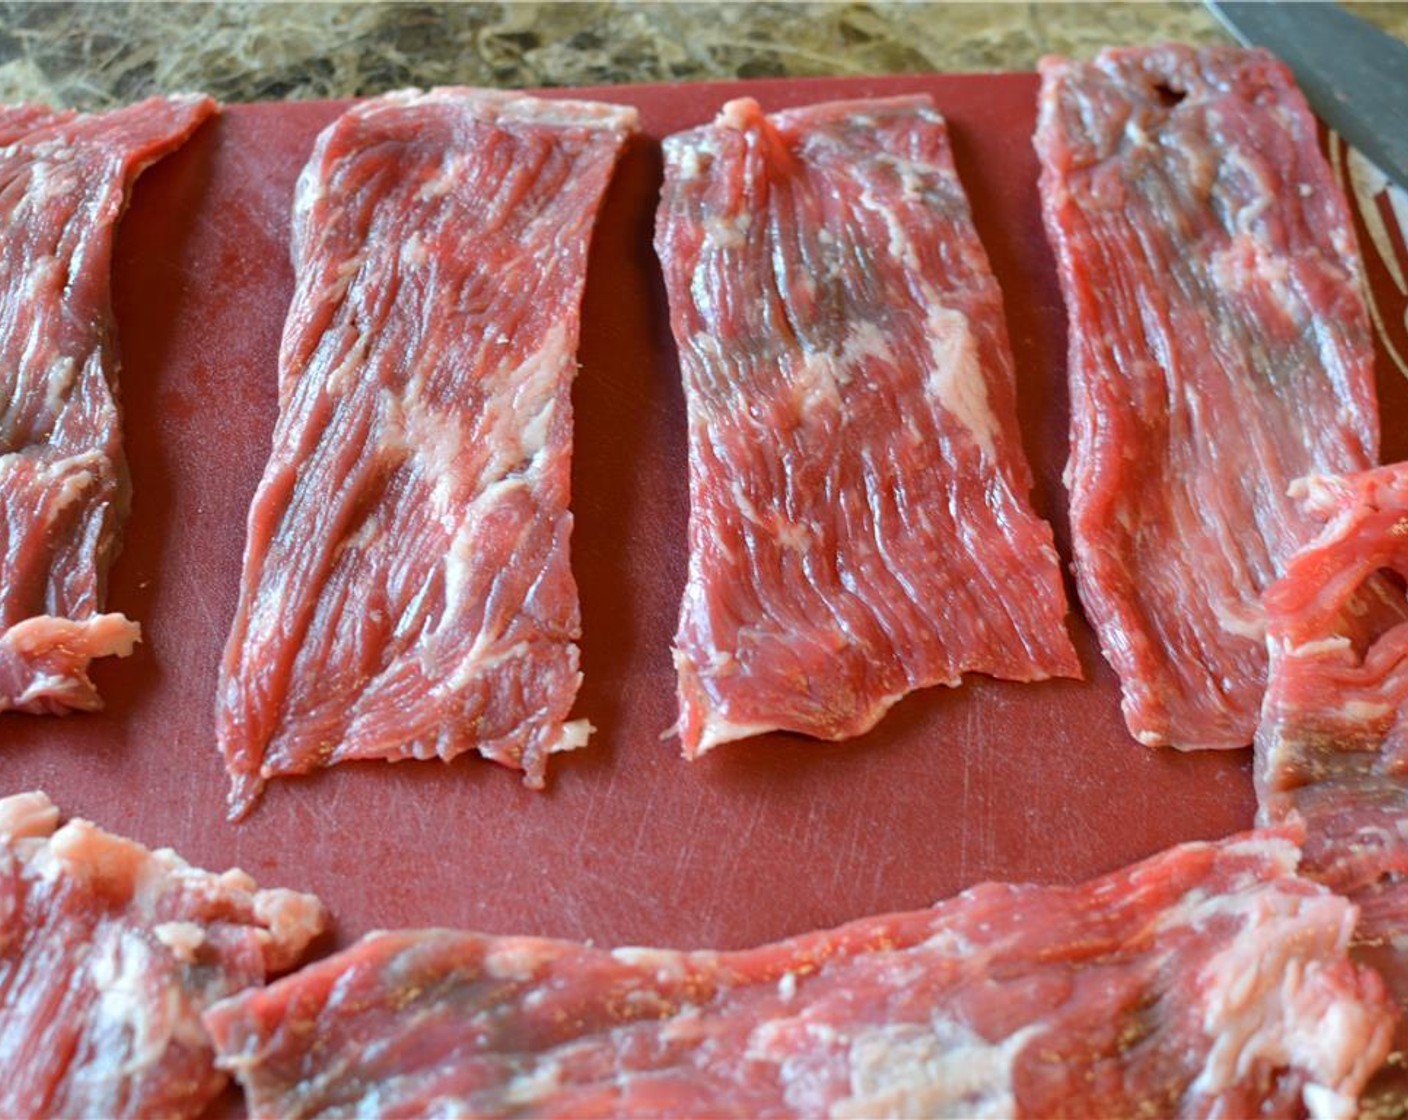 step 1 Start by prepping the Skirt Steak (1.5 lb). Trim as much fat as you can and cut the steak into 3-inch wide strips.